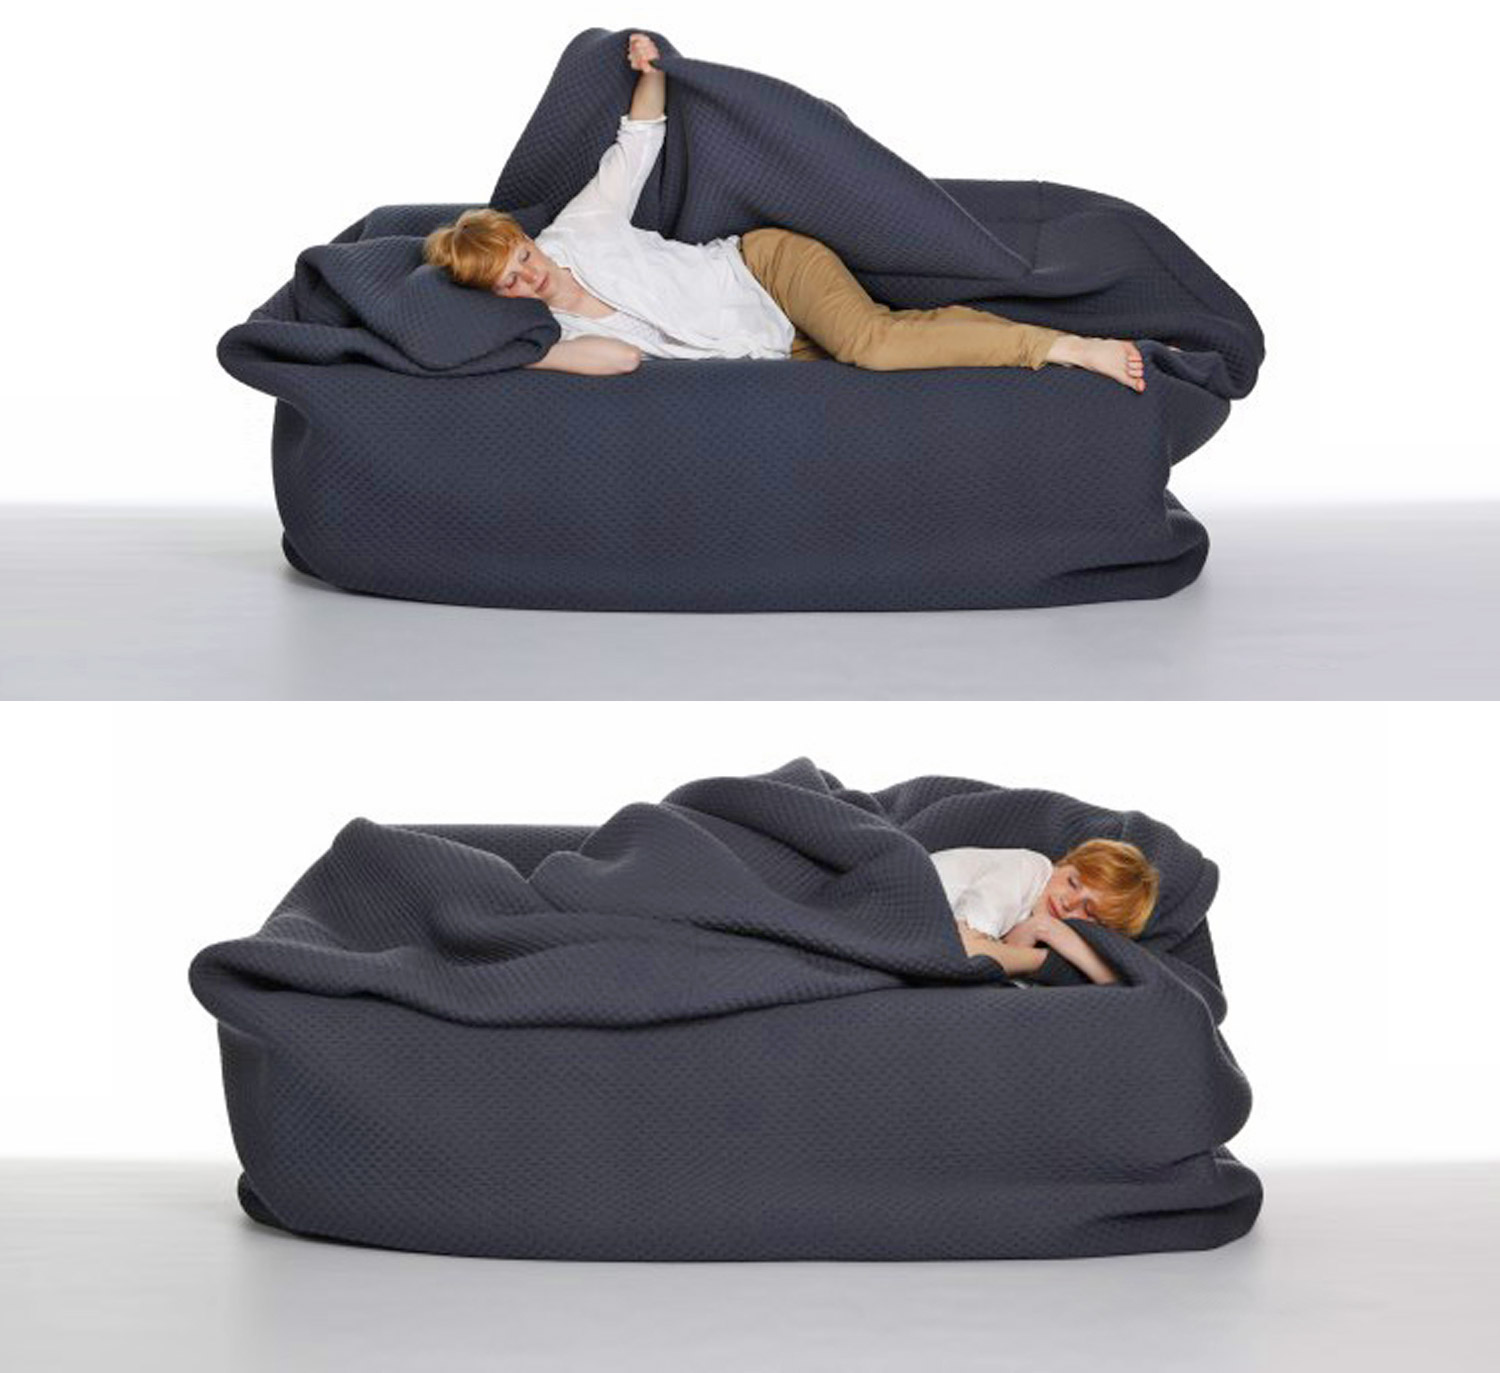 Share 158+ double bed size bean bag latest - esthdonghoadian